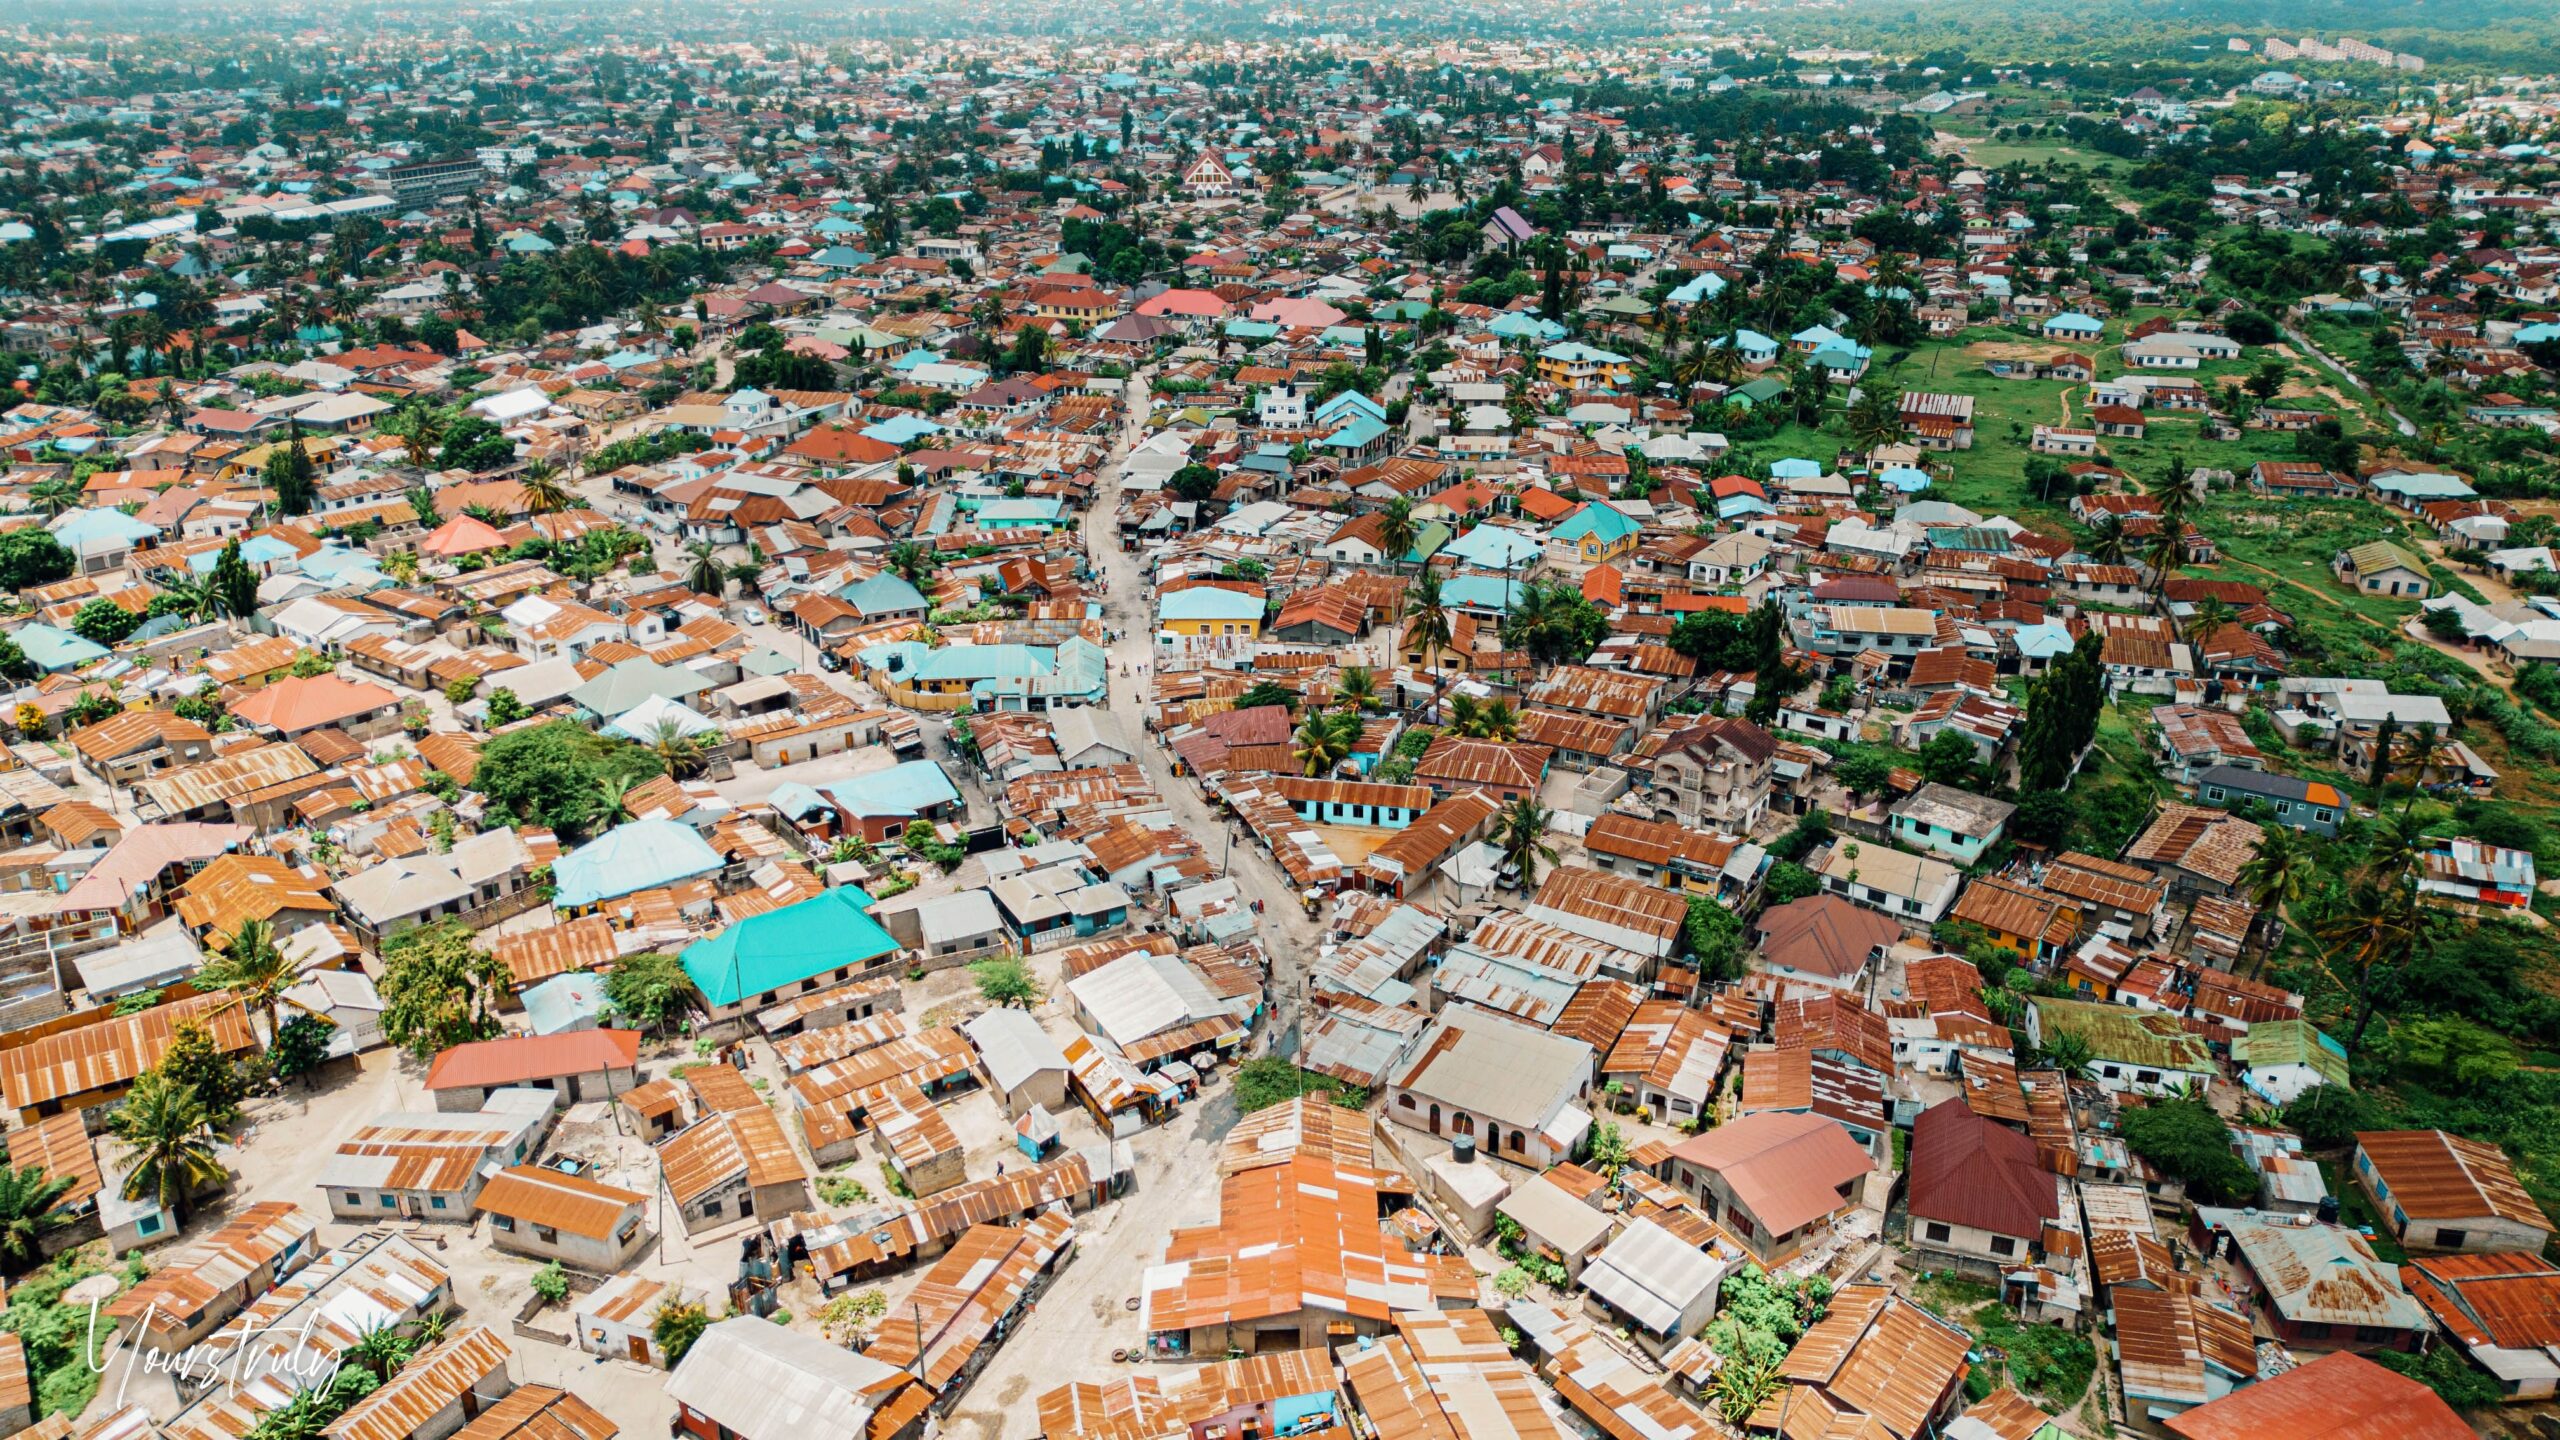 Aerial view of the small town on the Zanzibar island